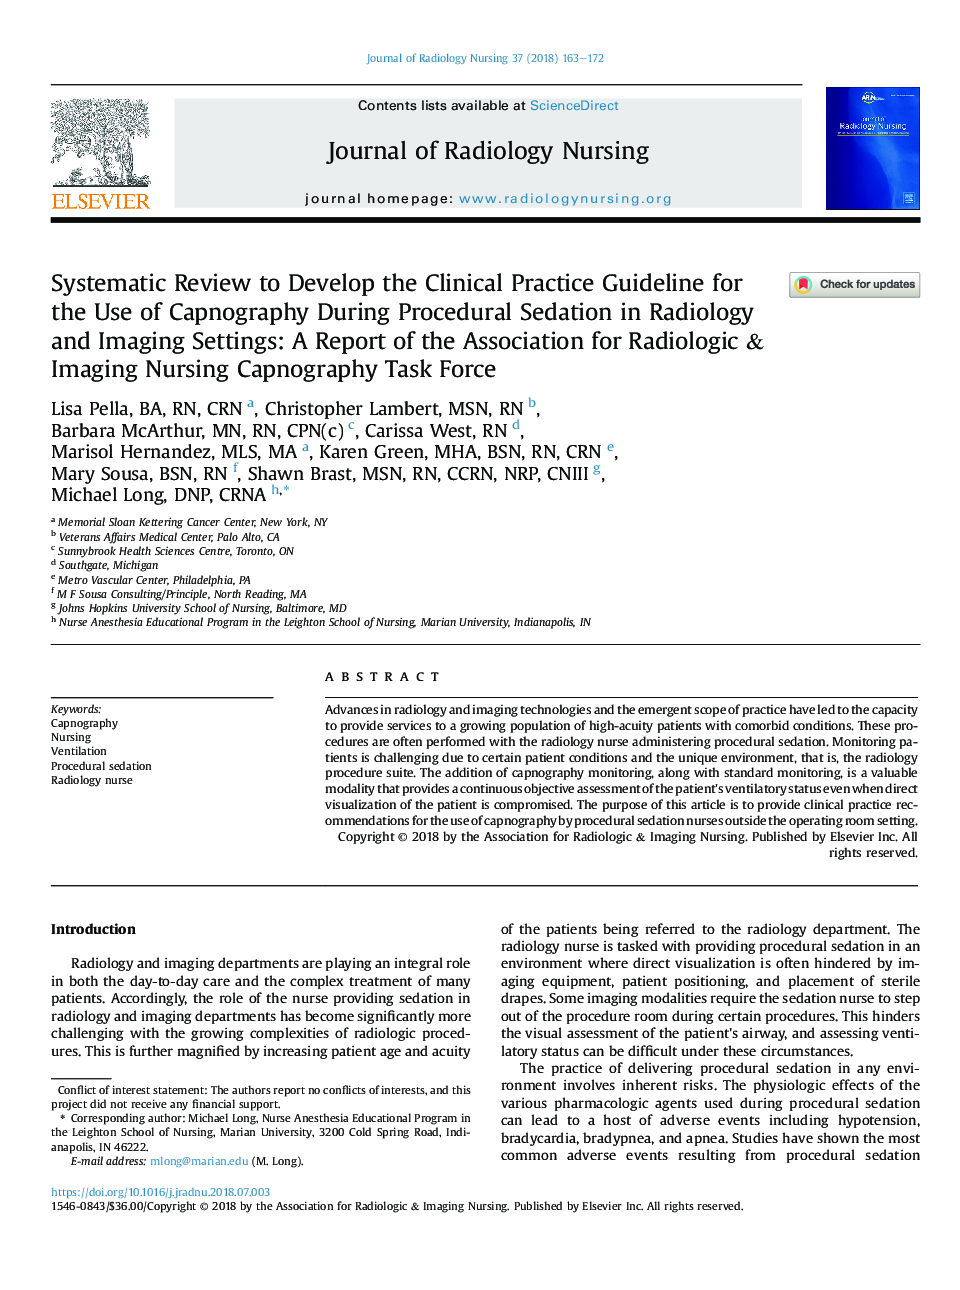 Systematic Review to Develop the Clinical Practice Guideline for the Use of Capnography During Procedural Sedation in Radiology and Imaging Settings: A Report of the Association for Radiologic & Imaging Nursing Capnography Task Force